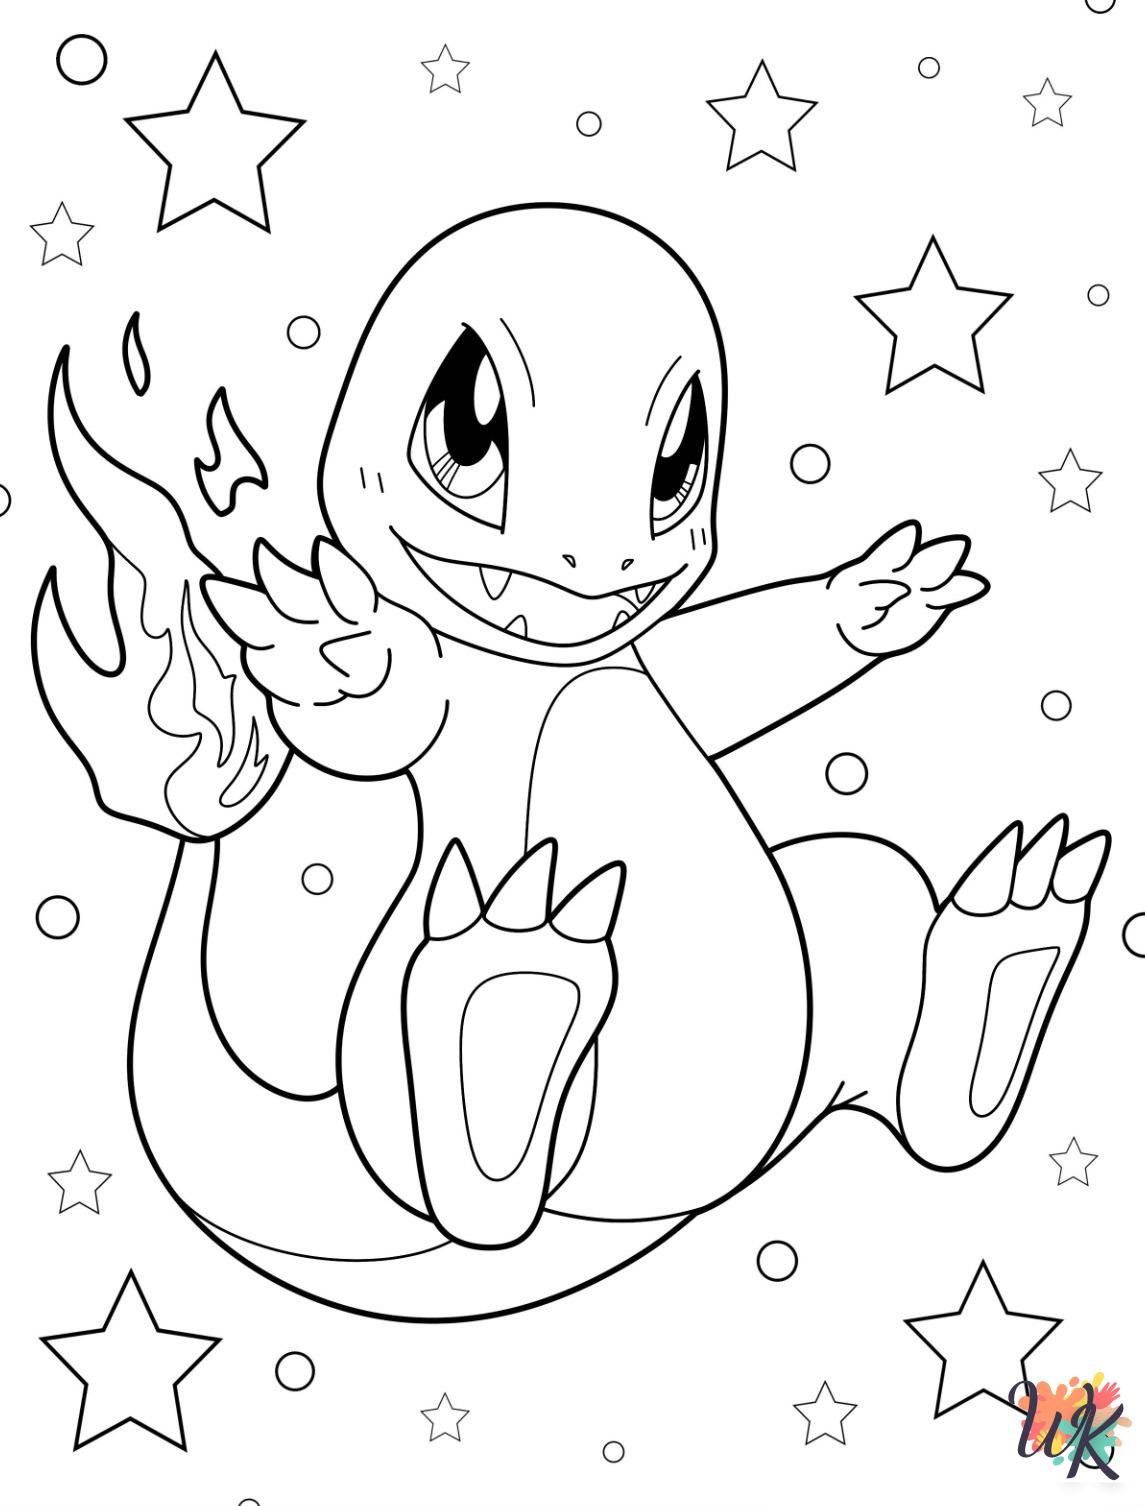 detailed Charmander coloring pages for adults